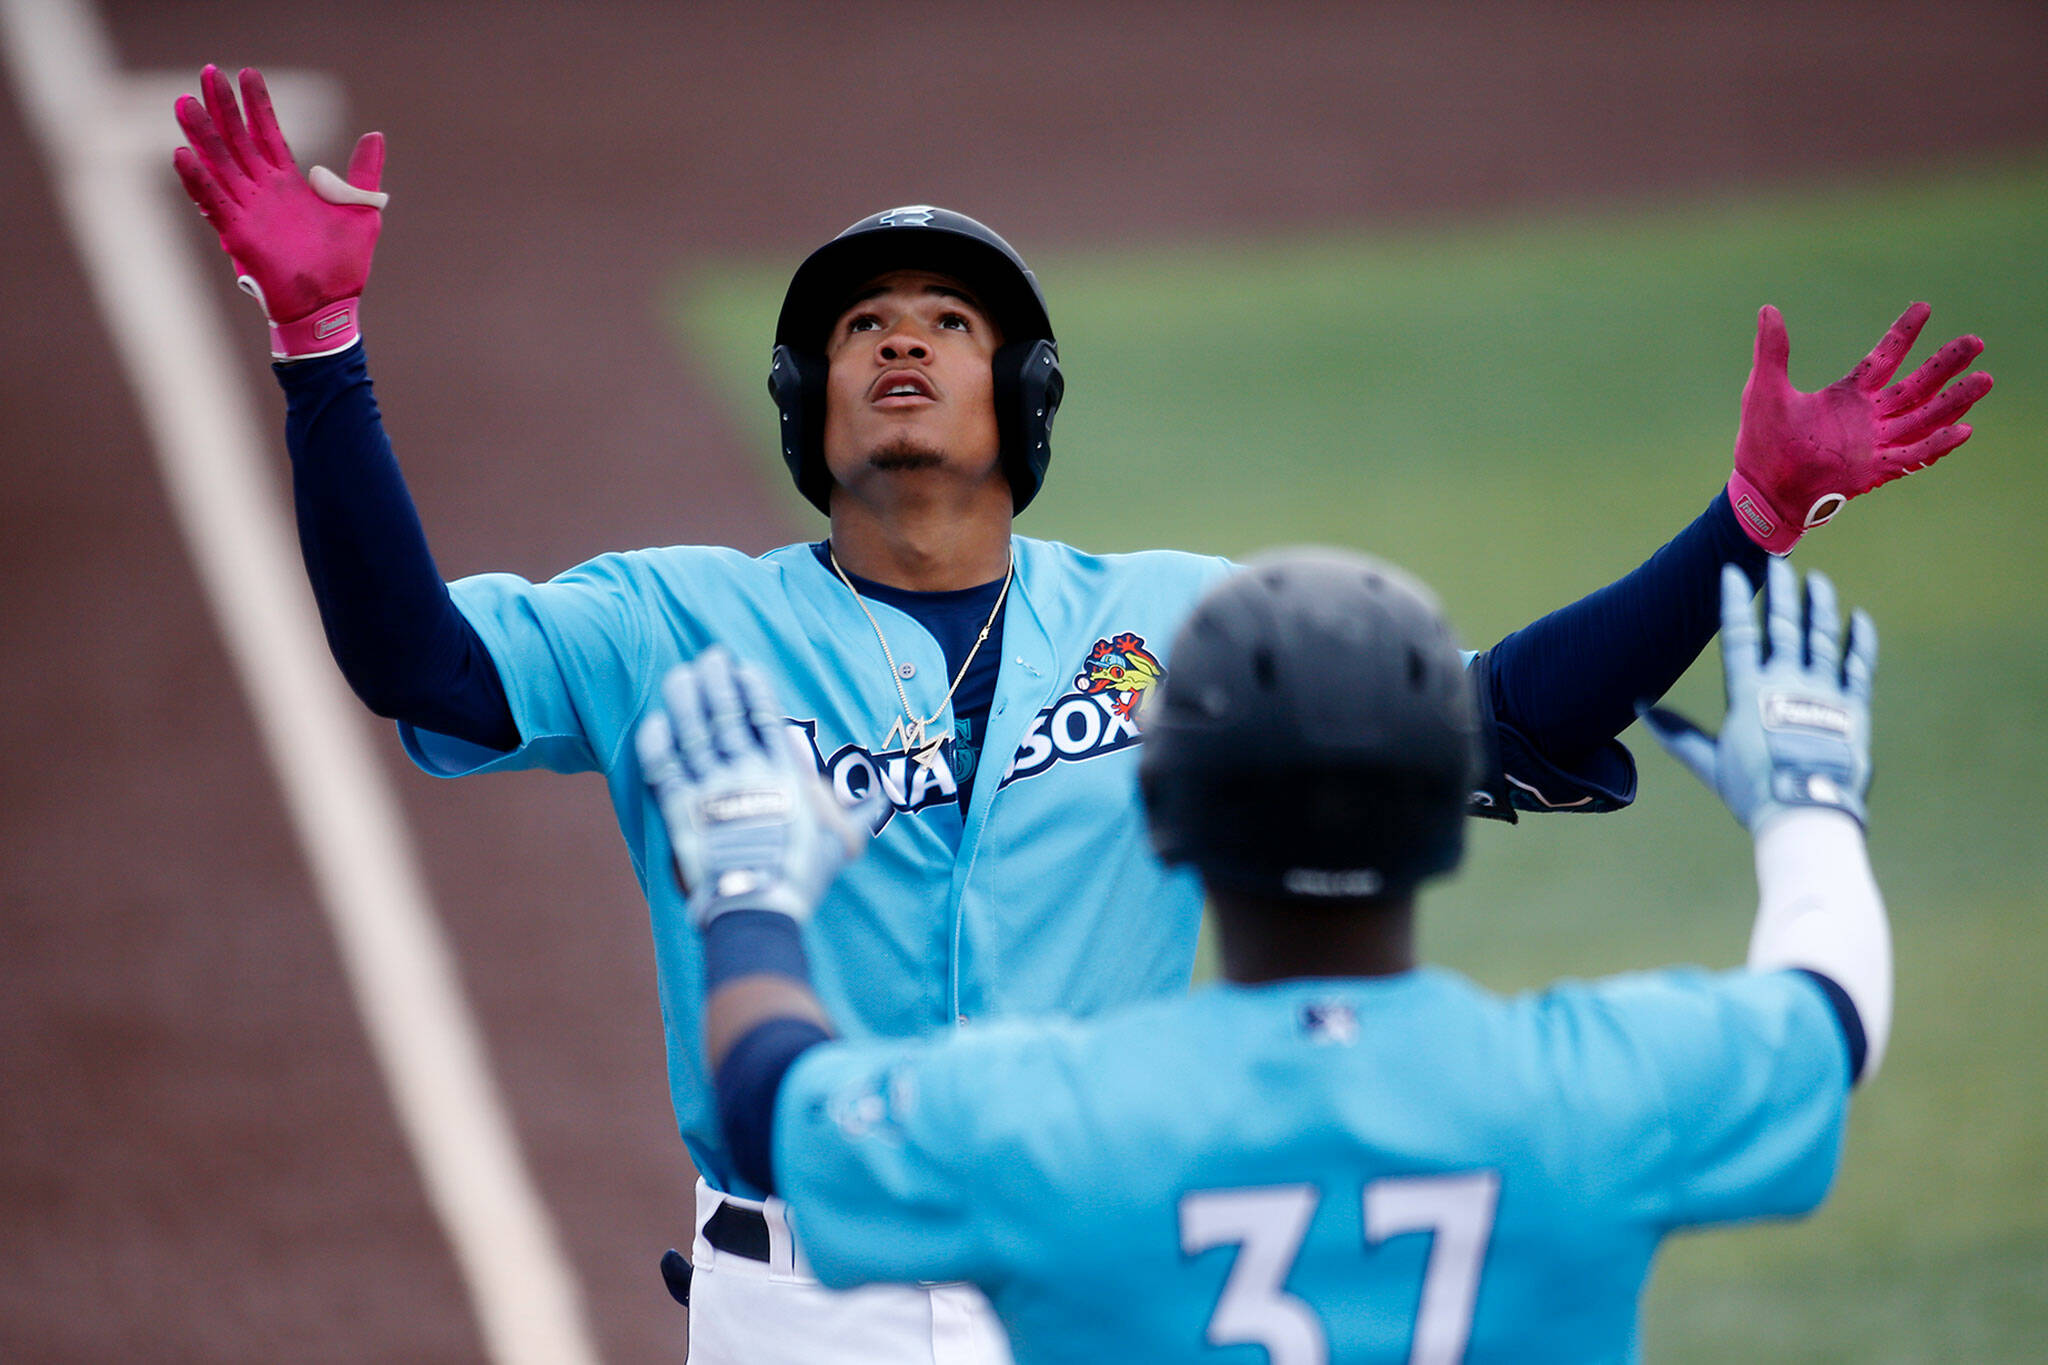 The AquaSox’s Noelvi Marte looks up to the sky while rounding the bases after a long homer to center field during a game against the Vancouver Canadians Wednesday, July 6, 2022, at Funko Field in Everett, Washington. (Ryan Berry / The Herald)